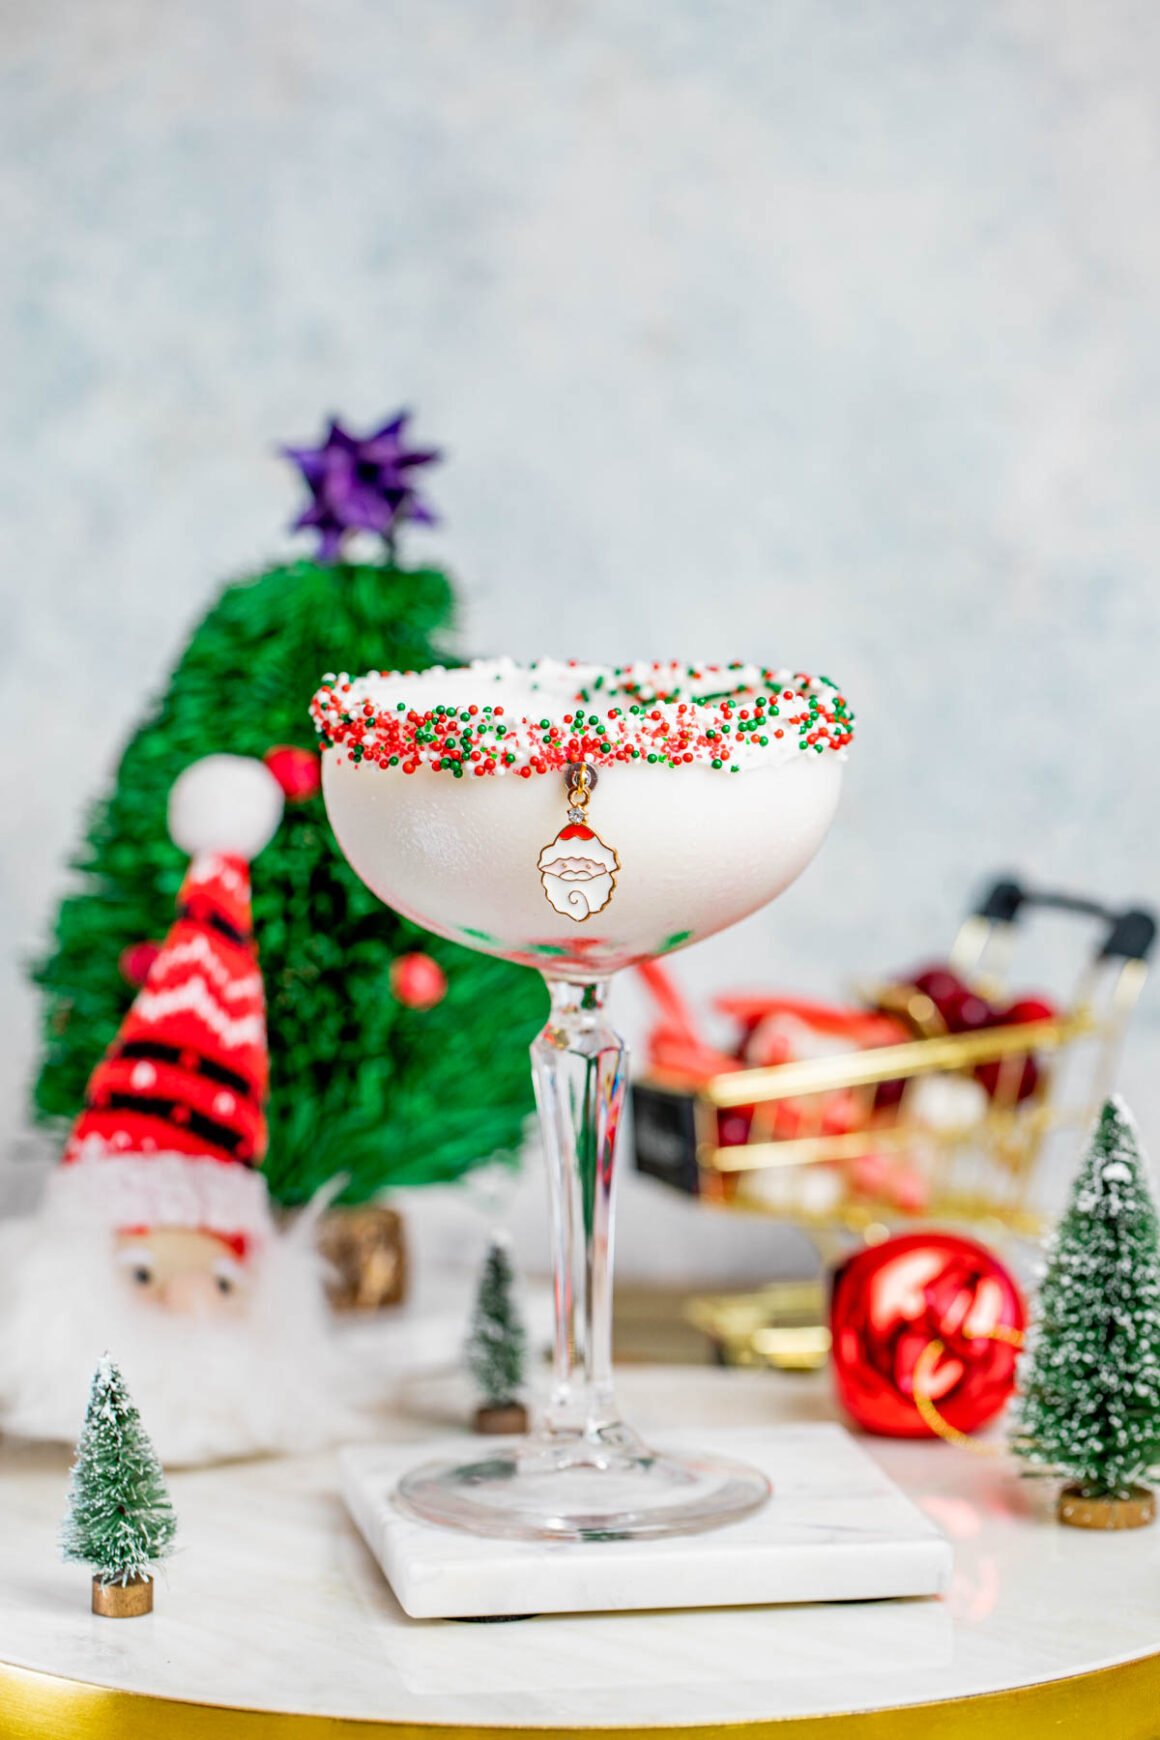 The holiday season calls for indulgence and this delicious Sugar Cookie Martini is a perfect gift to complement your holiday gatherings!

